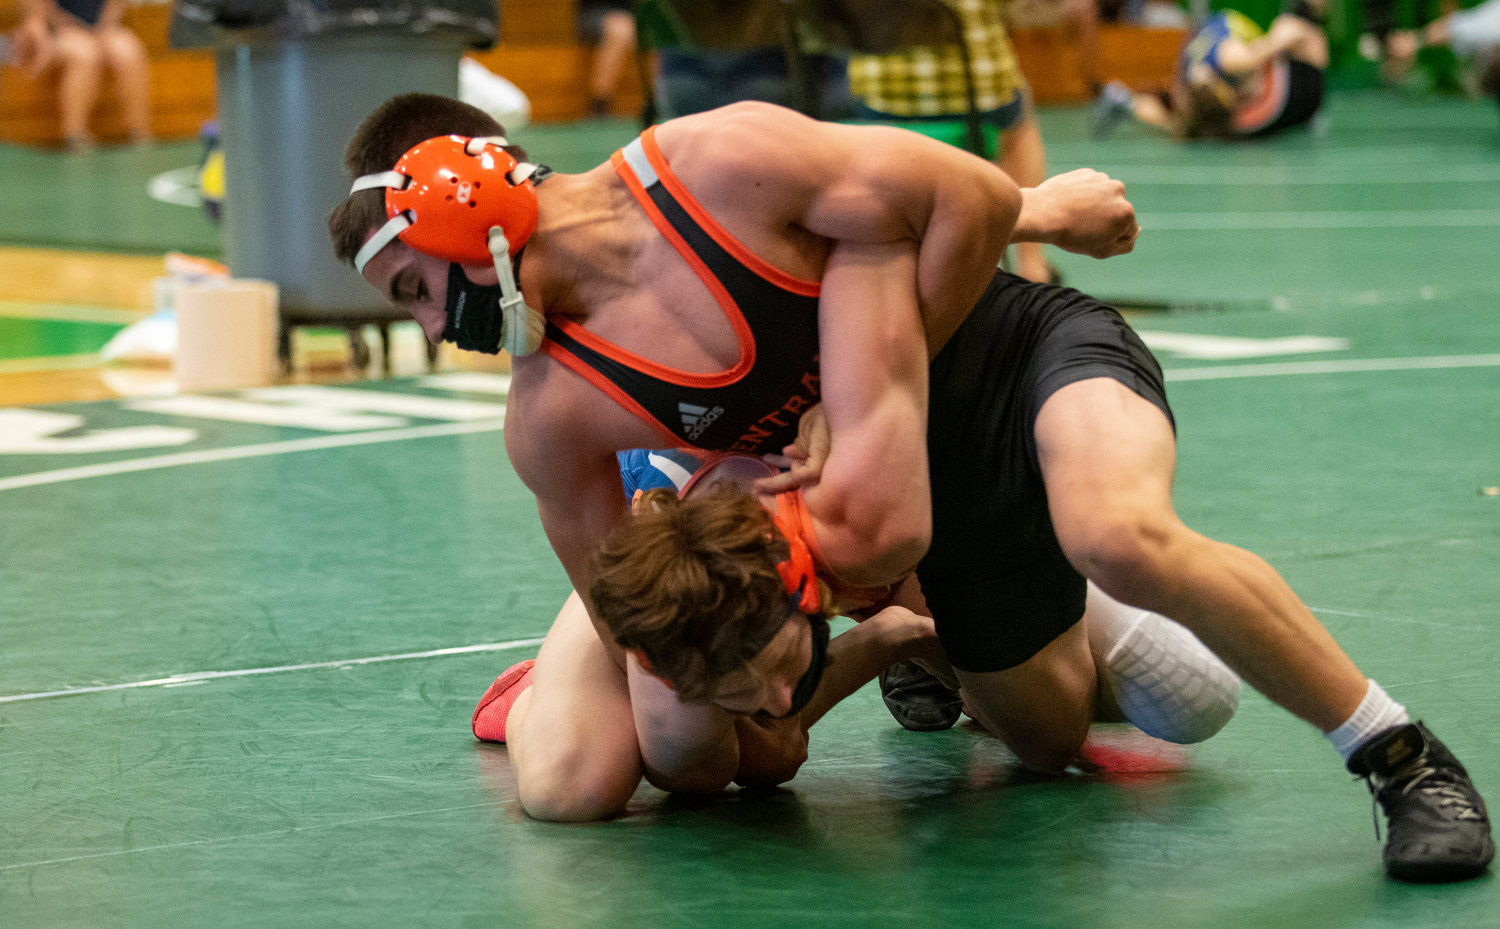 Centralia freshman prepares to for a first-round pin of a Ridgefield opponent in the opening round of the 120-pound bracket at the 2A District 4 Tournament Tuesday in Tumwater.